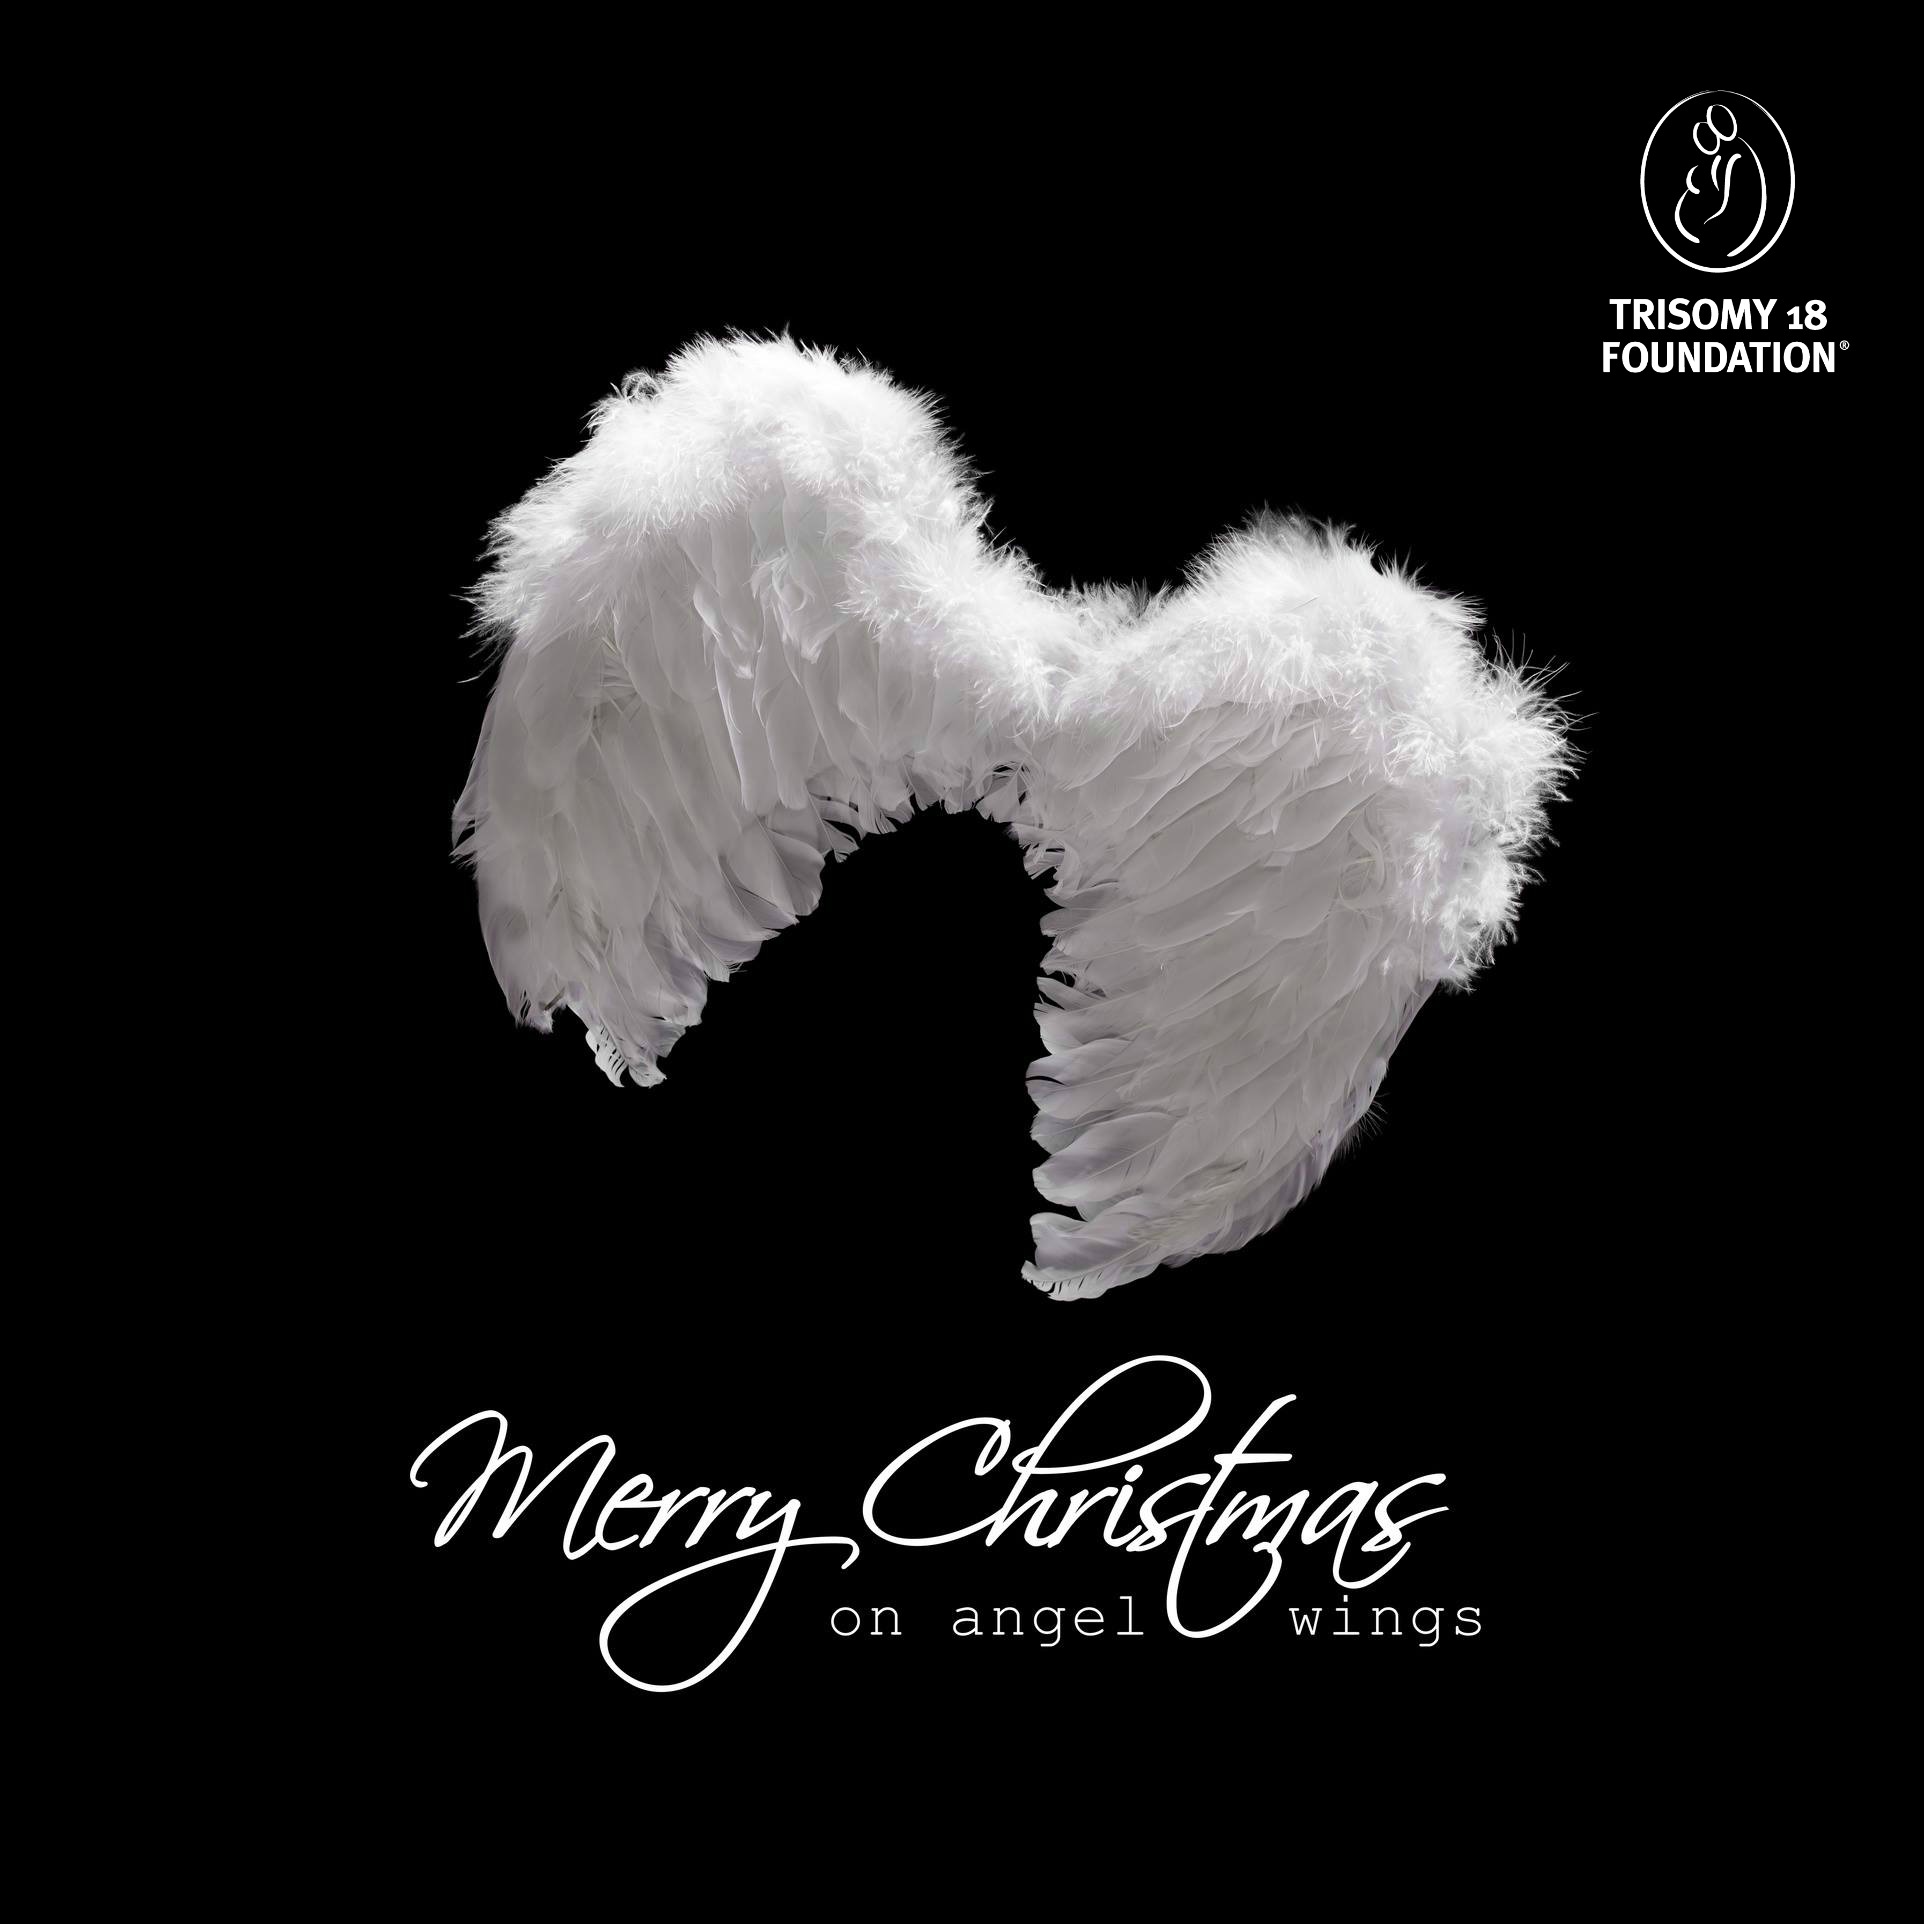 Angel Wings Xmas with logo